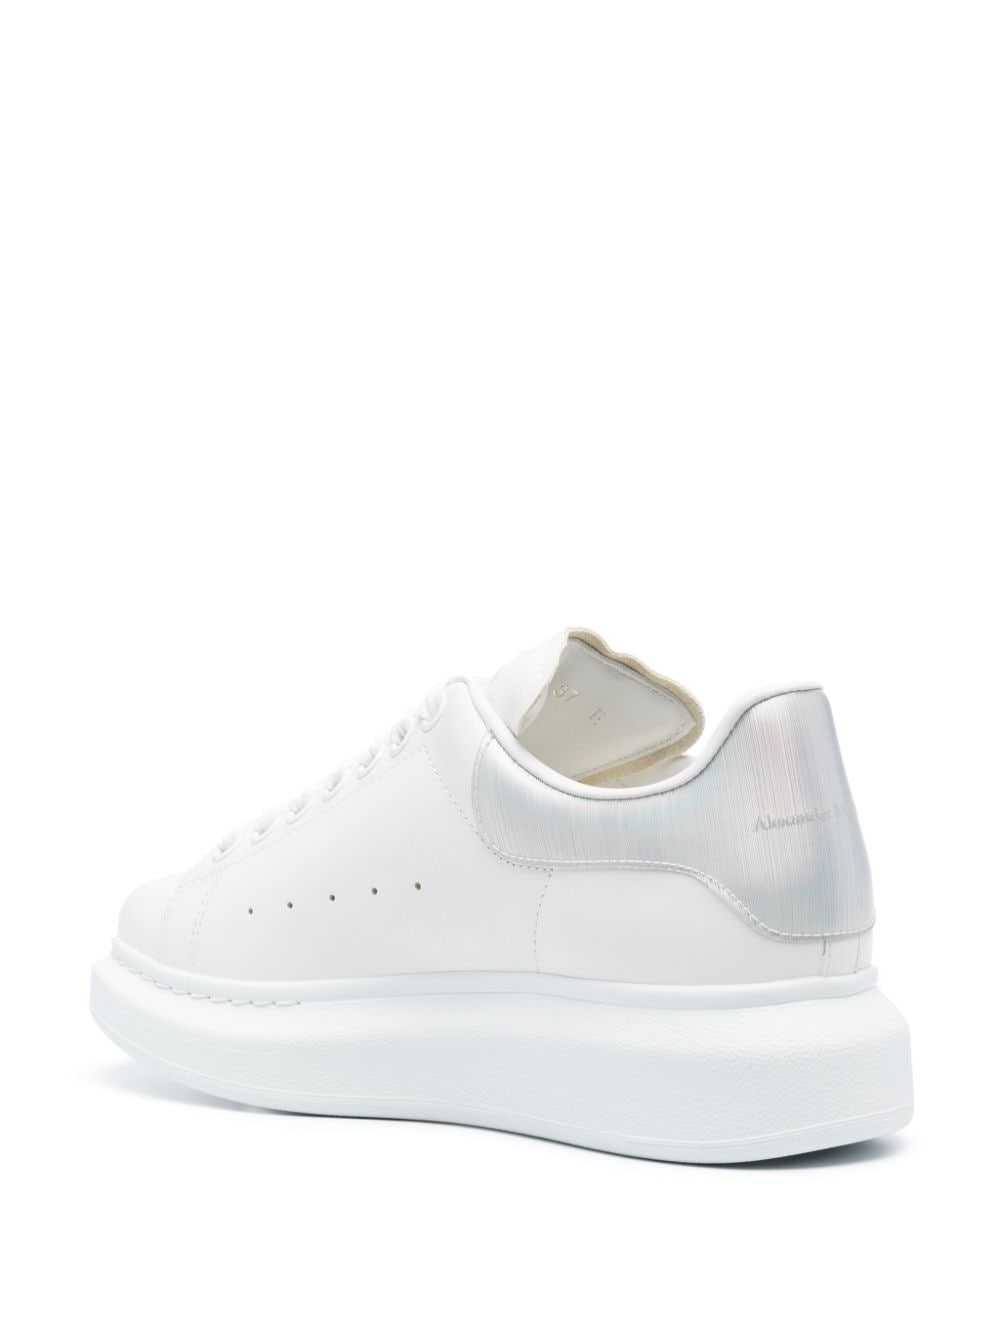 iridescent-panel leather sneakers - 3